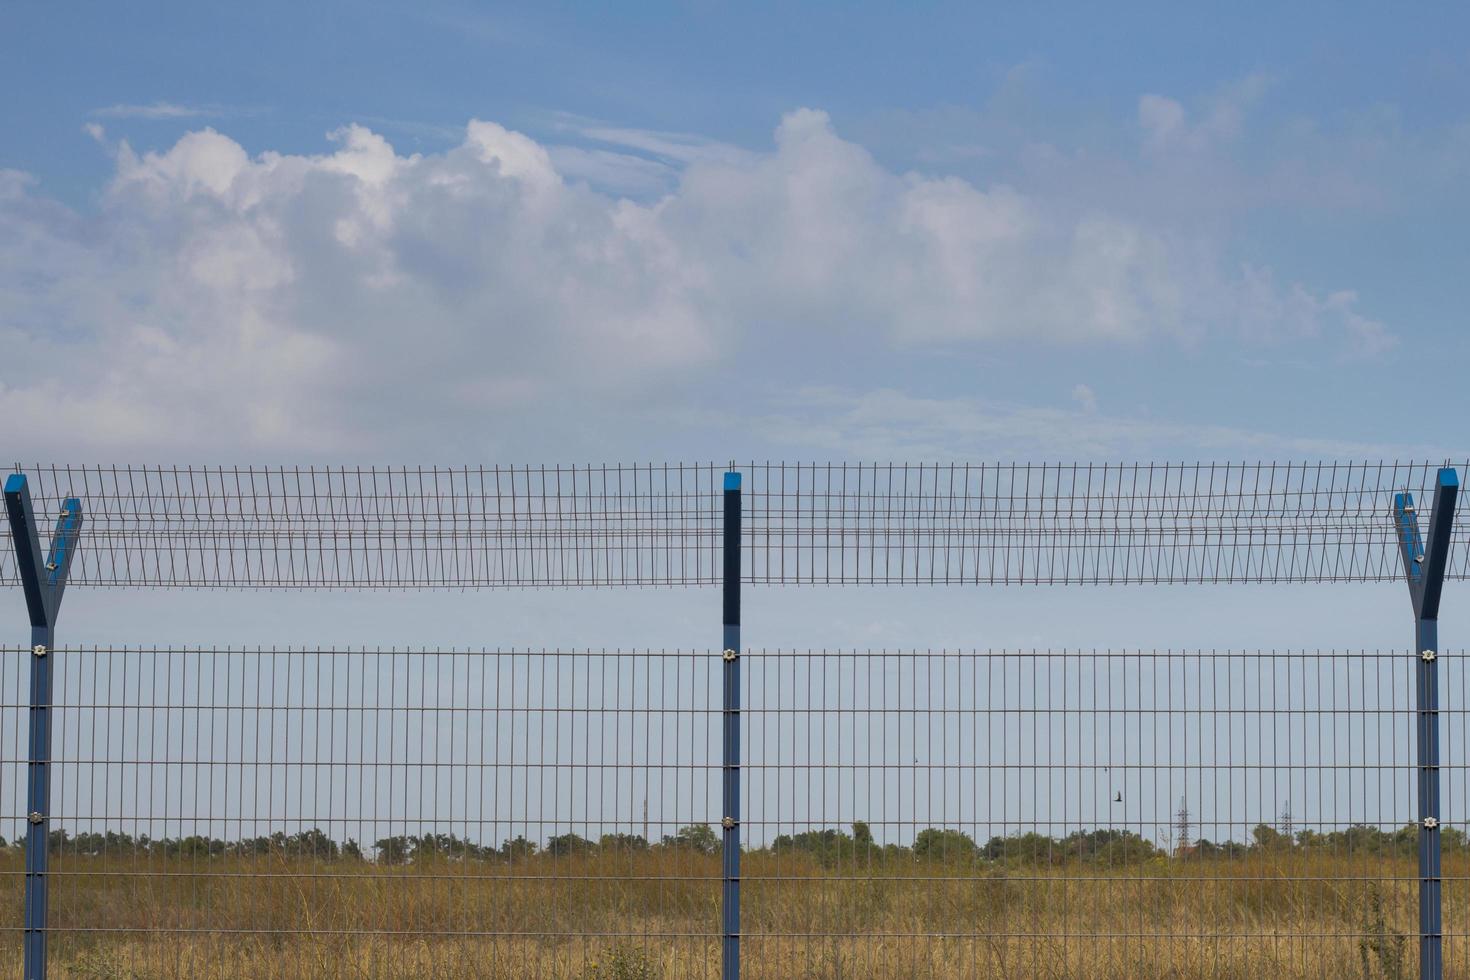 cage fence in fields, blue sky background photo